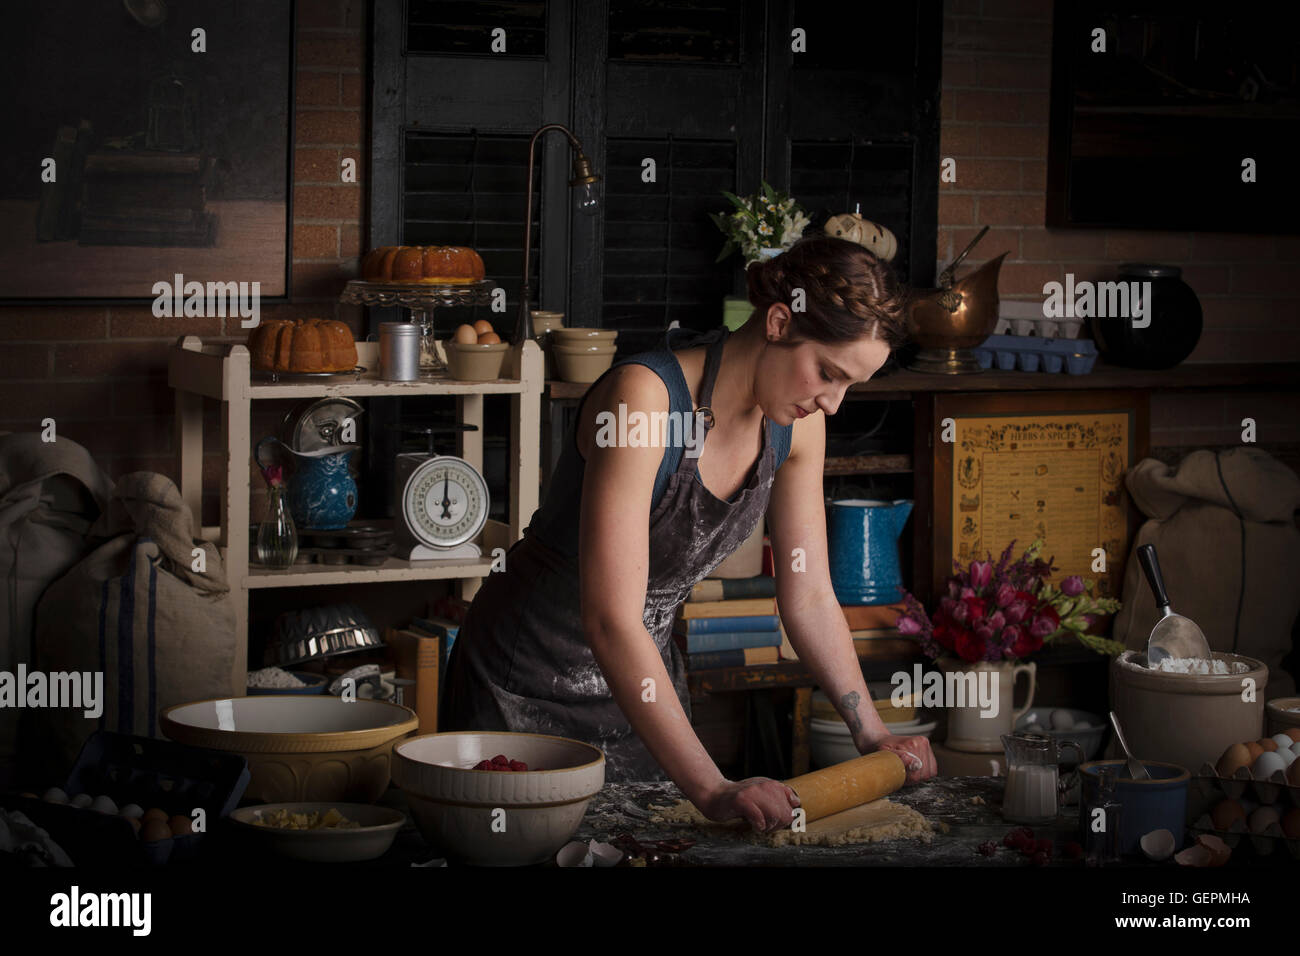 Valentine's Day baking, young woman standing in a kitchen, preparing dough for biscuits. Stock Photo